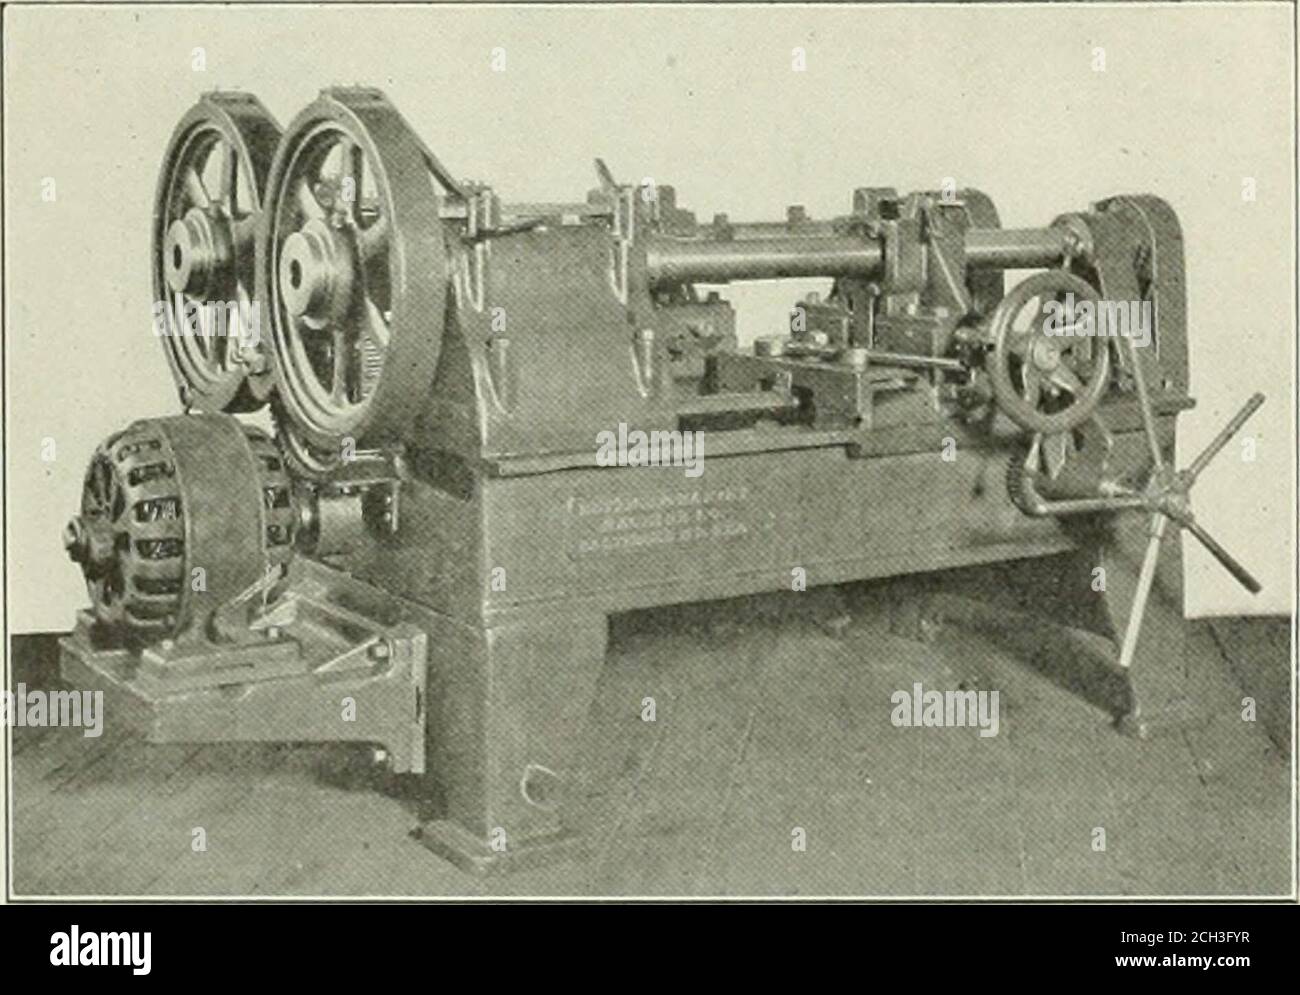 . American engineer . ear type. The bed is of sufficient length to bore andface car boxes 6 in. x 12 in. The headstocks are bolted di-rectly to the bed and are of sufficient height to give a clear-ance of 13 in. from the center of the spindle bearing to thetop of the bed. The spindles are of cast iron 4J4 in- in diam-eter with a 17 in. bearing in the headstock and carr3 steel toothgears which revolve loosely on the spindles and are connectedto them by sliding tooth steel clutches which are keyed to thespindle and actuated by an eccentric lever. The pinions areof bronze or steel while the drivi Stock Photo